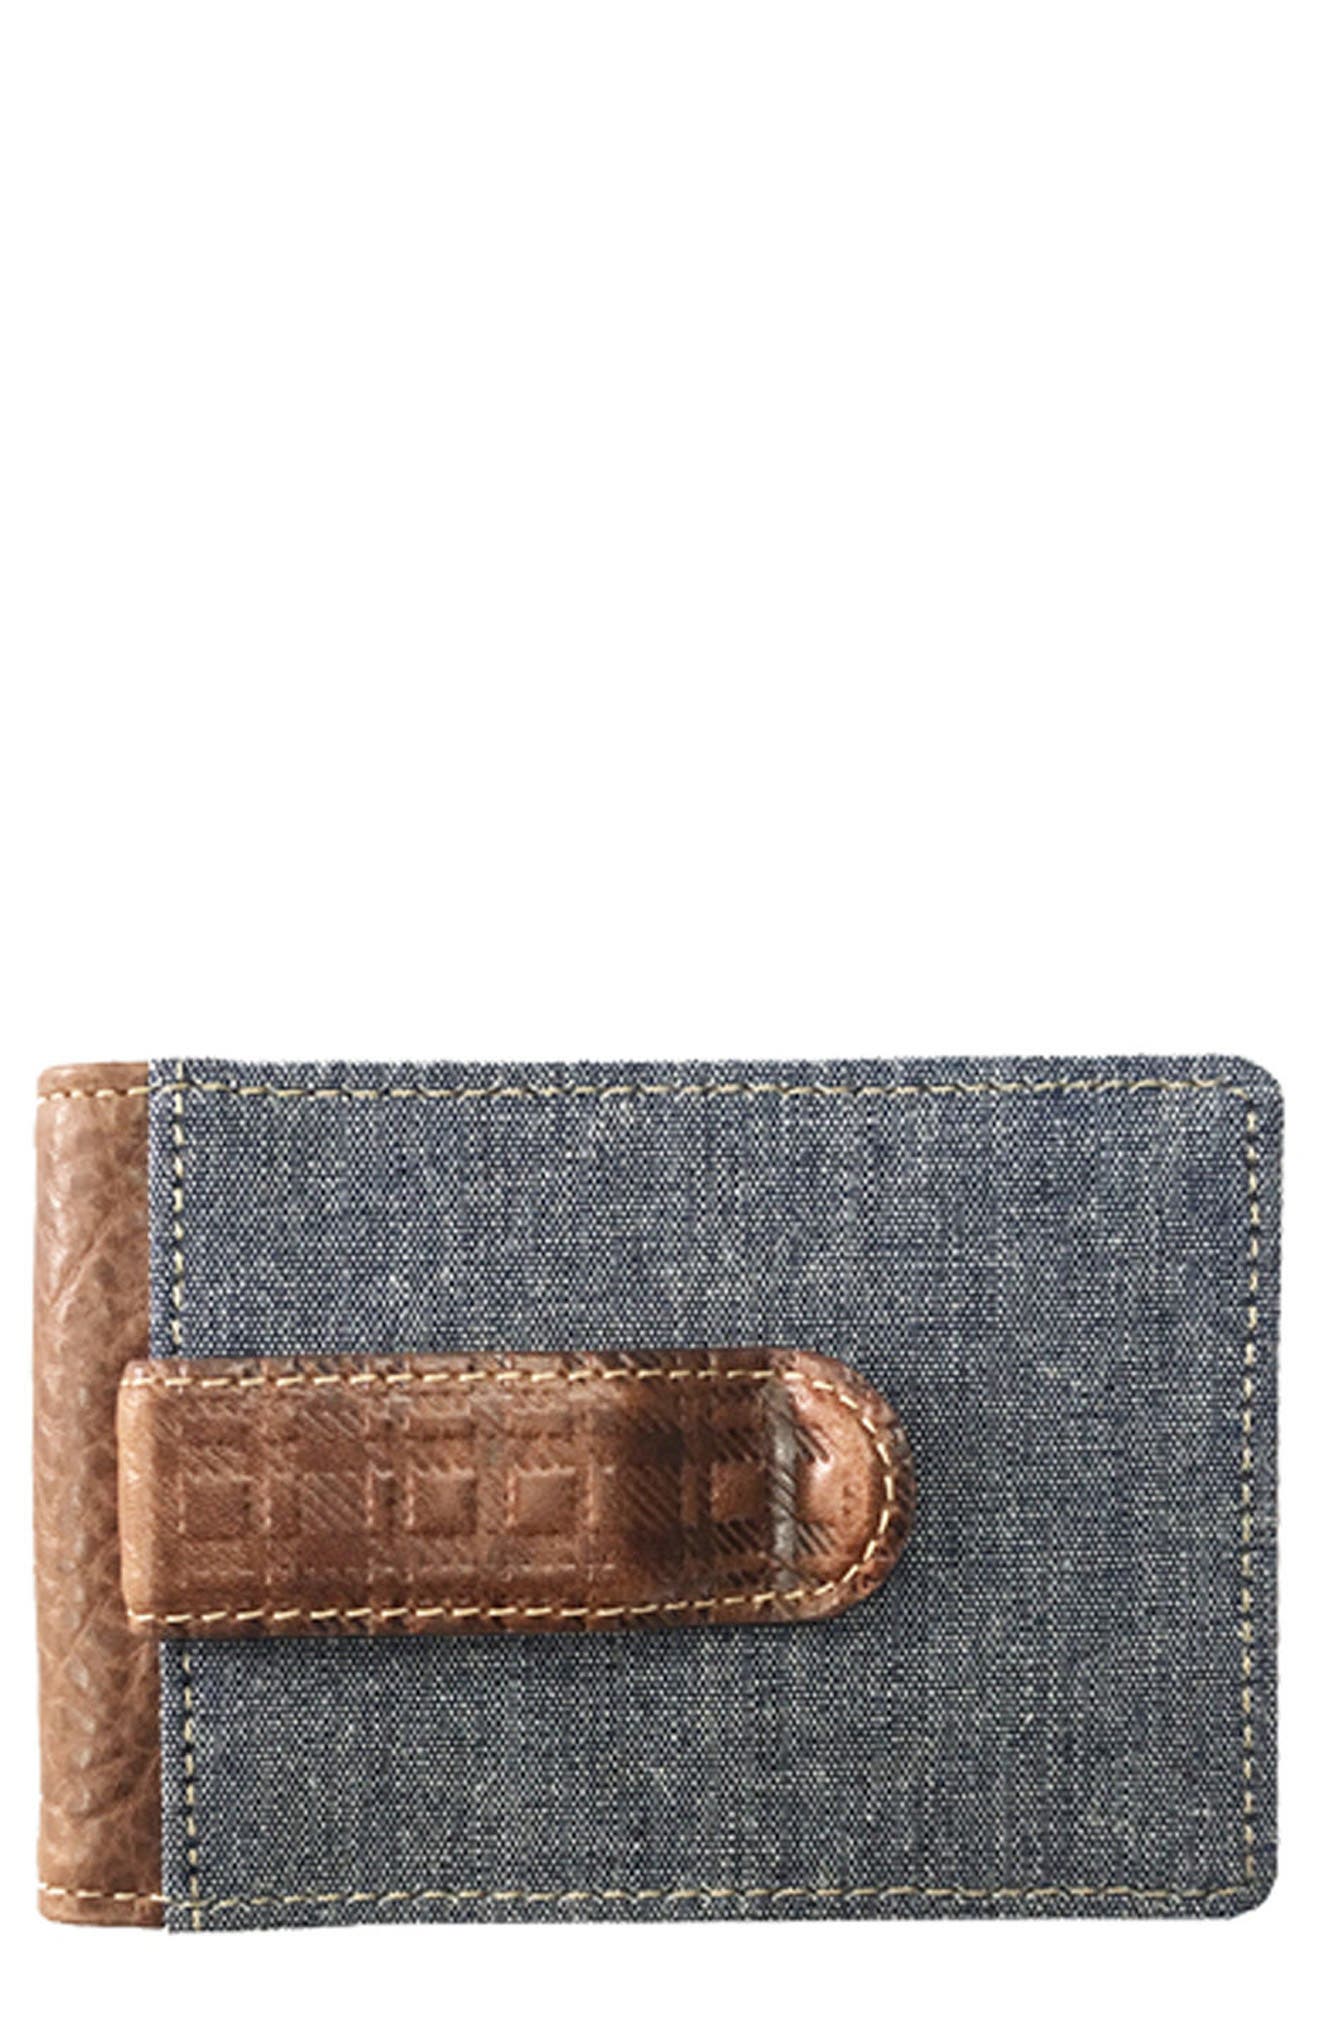 BOCONI Caleb Bifold Wallet with Money Clip in Chestnut/Chambray at Nordstrom